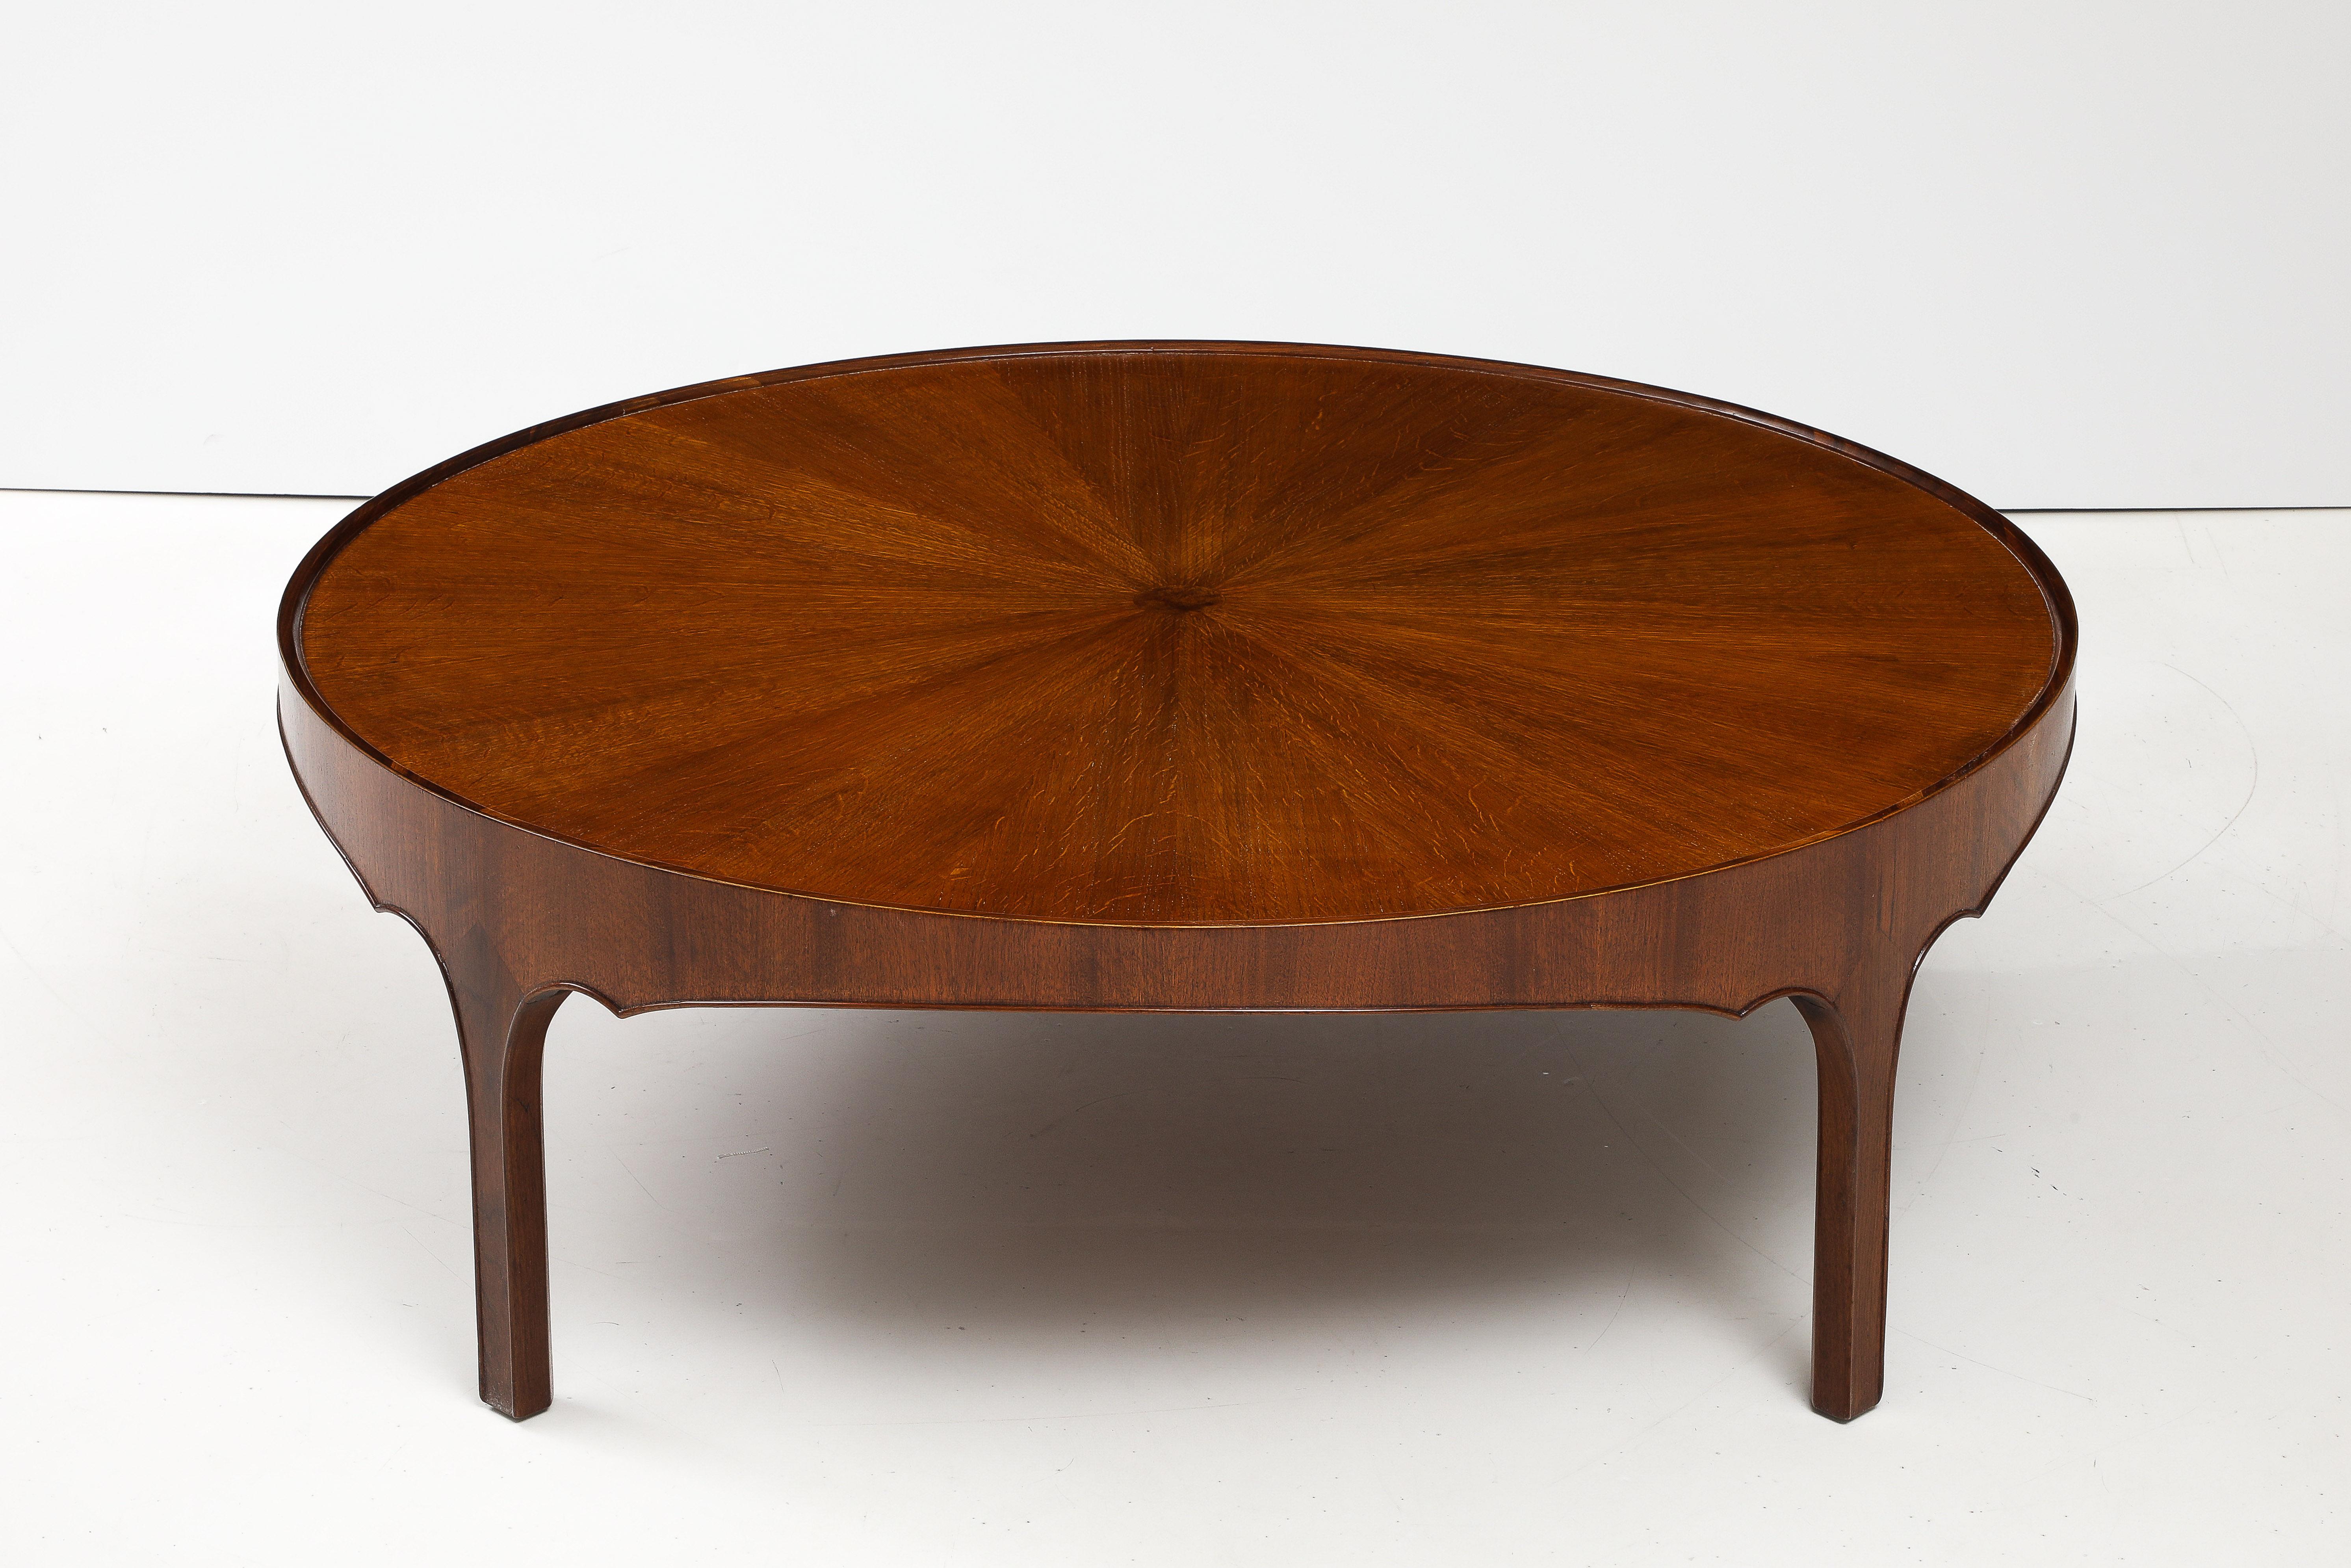 Round Baker Oversized 1960's Modern Walnut Coffee Table With Sunburst Top In Good Condition For Sale In New York, NY